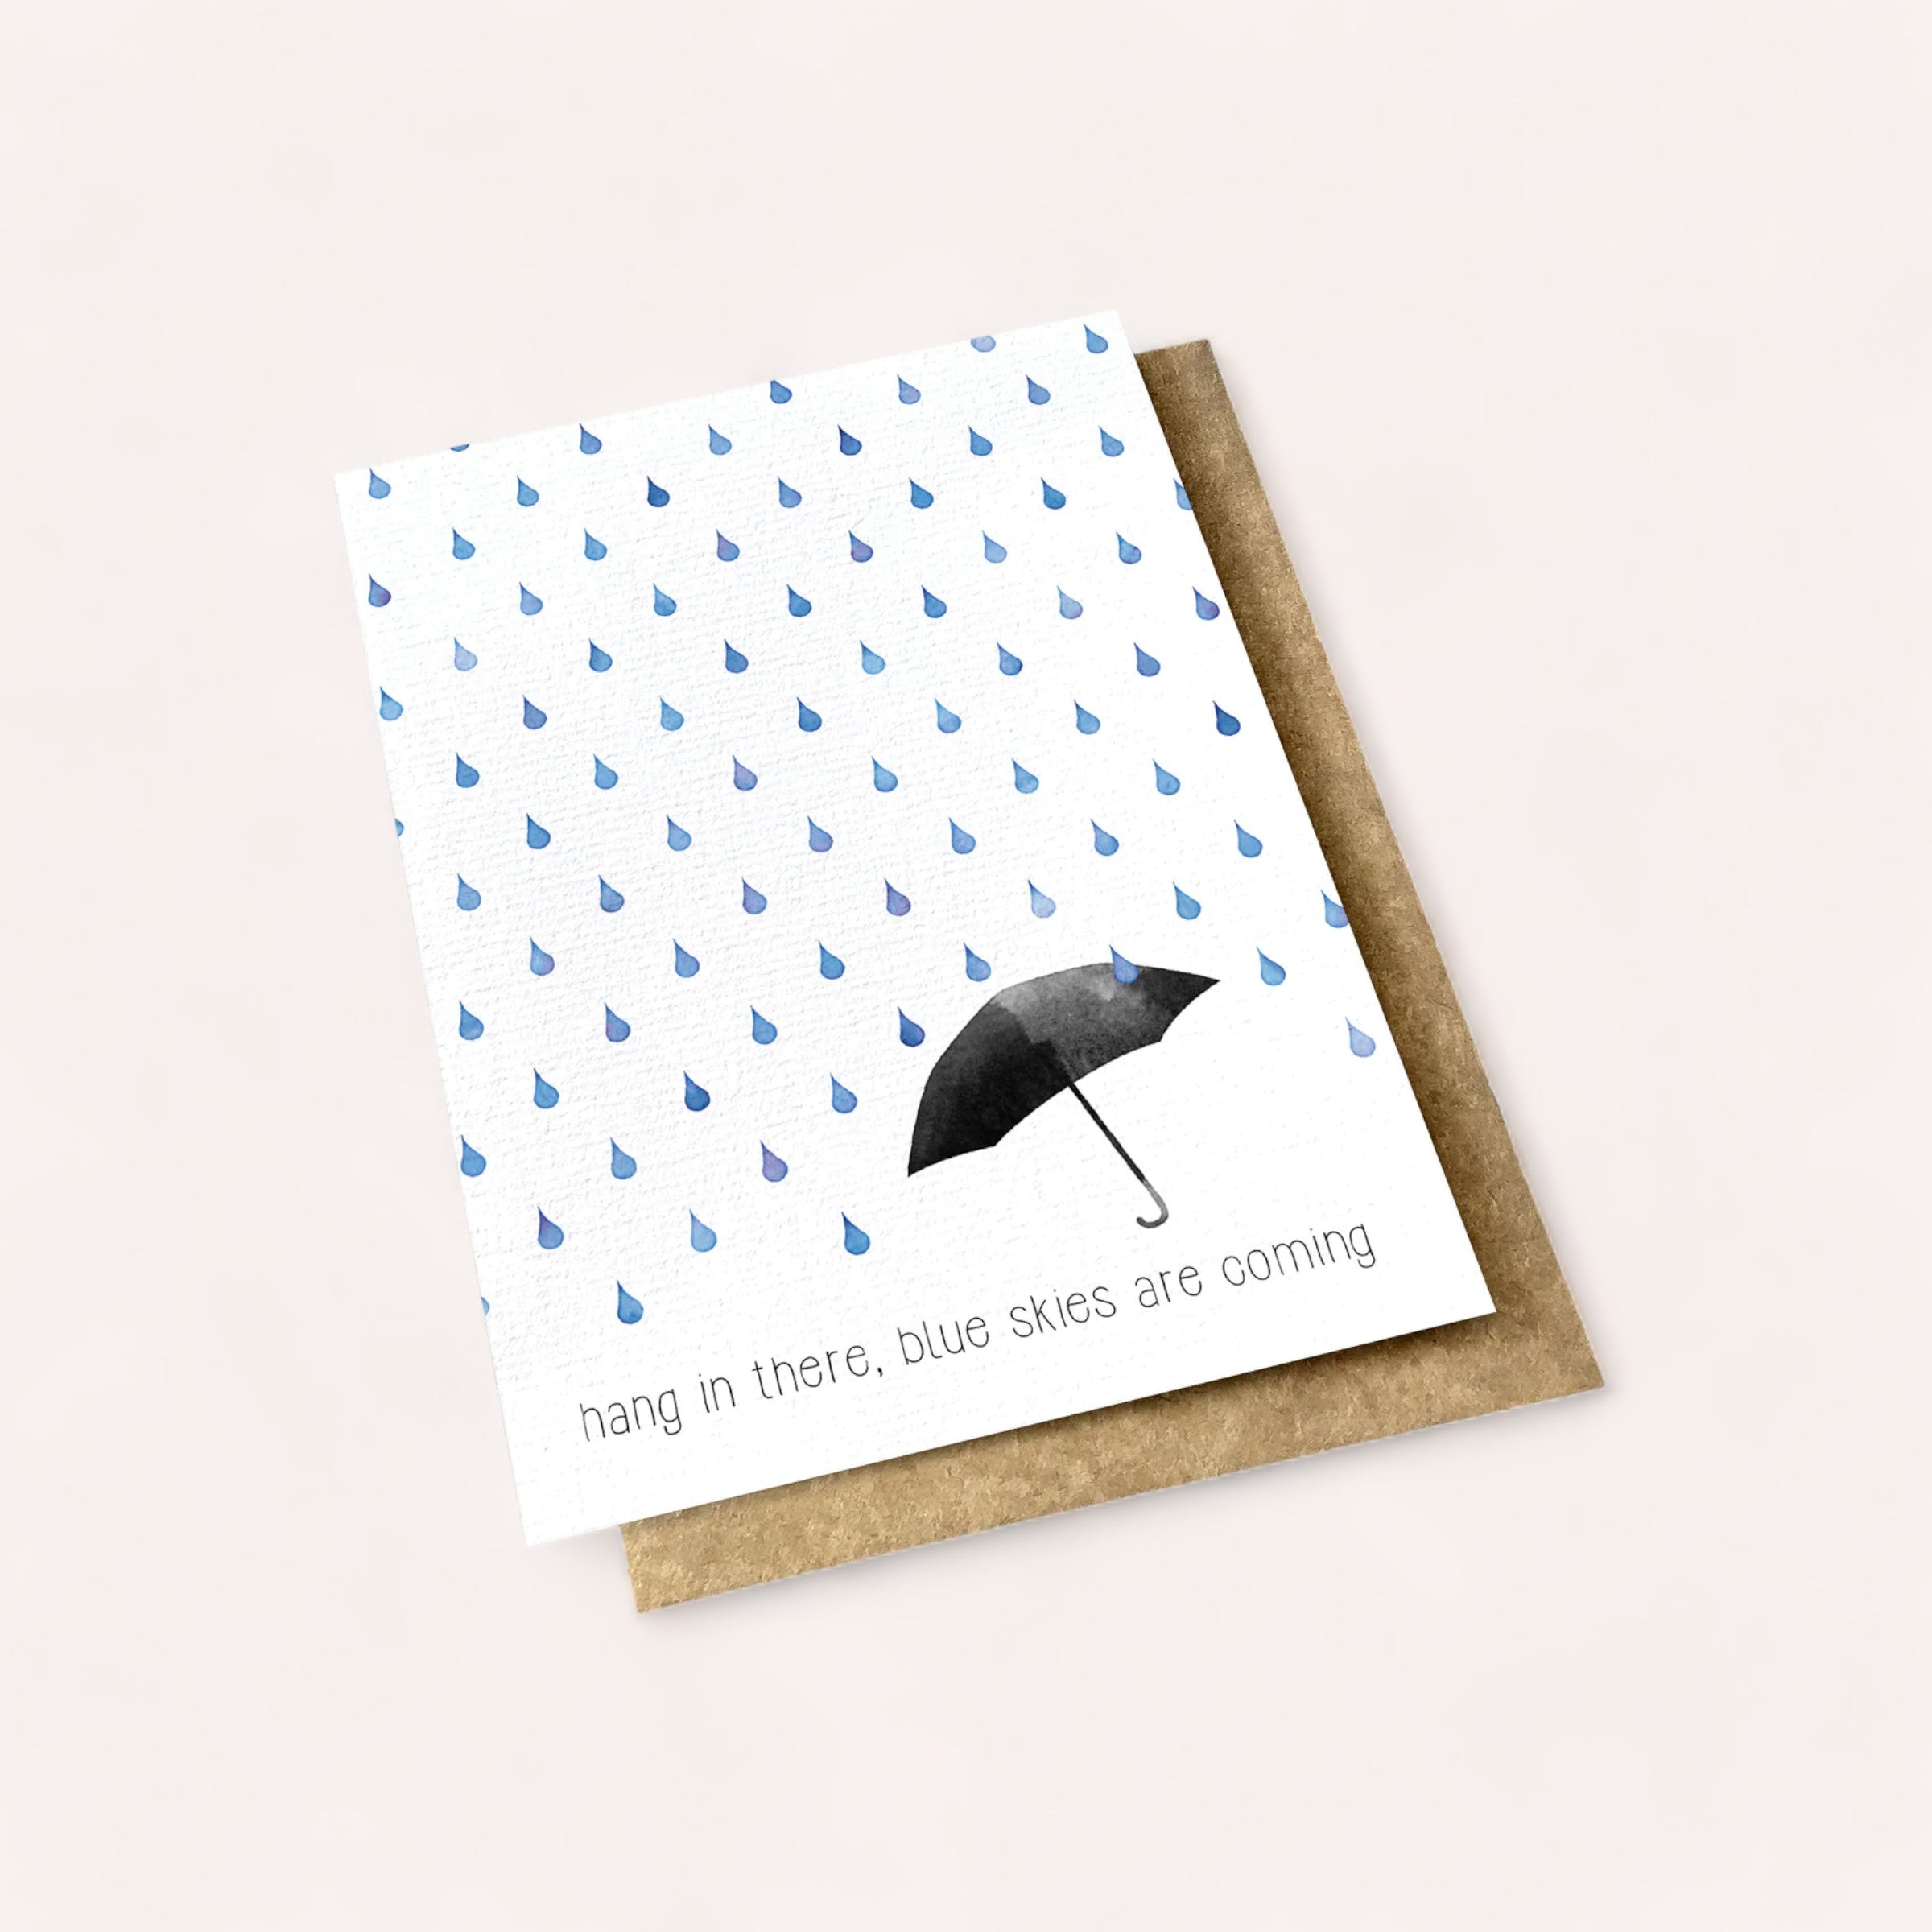 A "Blue Skies Are Coming Card" with a hopeful message, featuring a pattern of blue raindrops and a single black umbrella, with the text "hang in there, blue skies are coming." This product of New Zealand is by Ink Bomb.